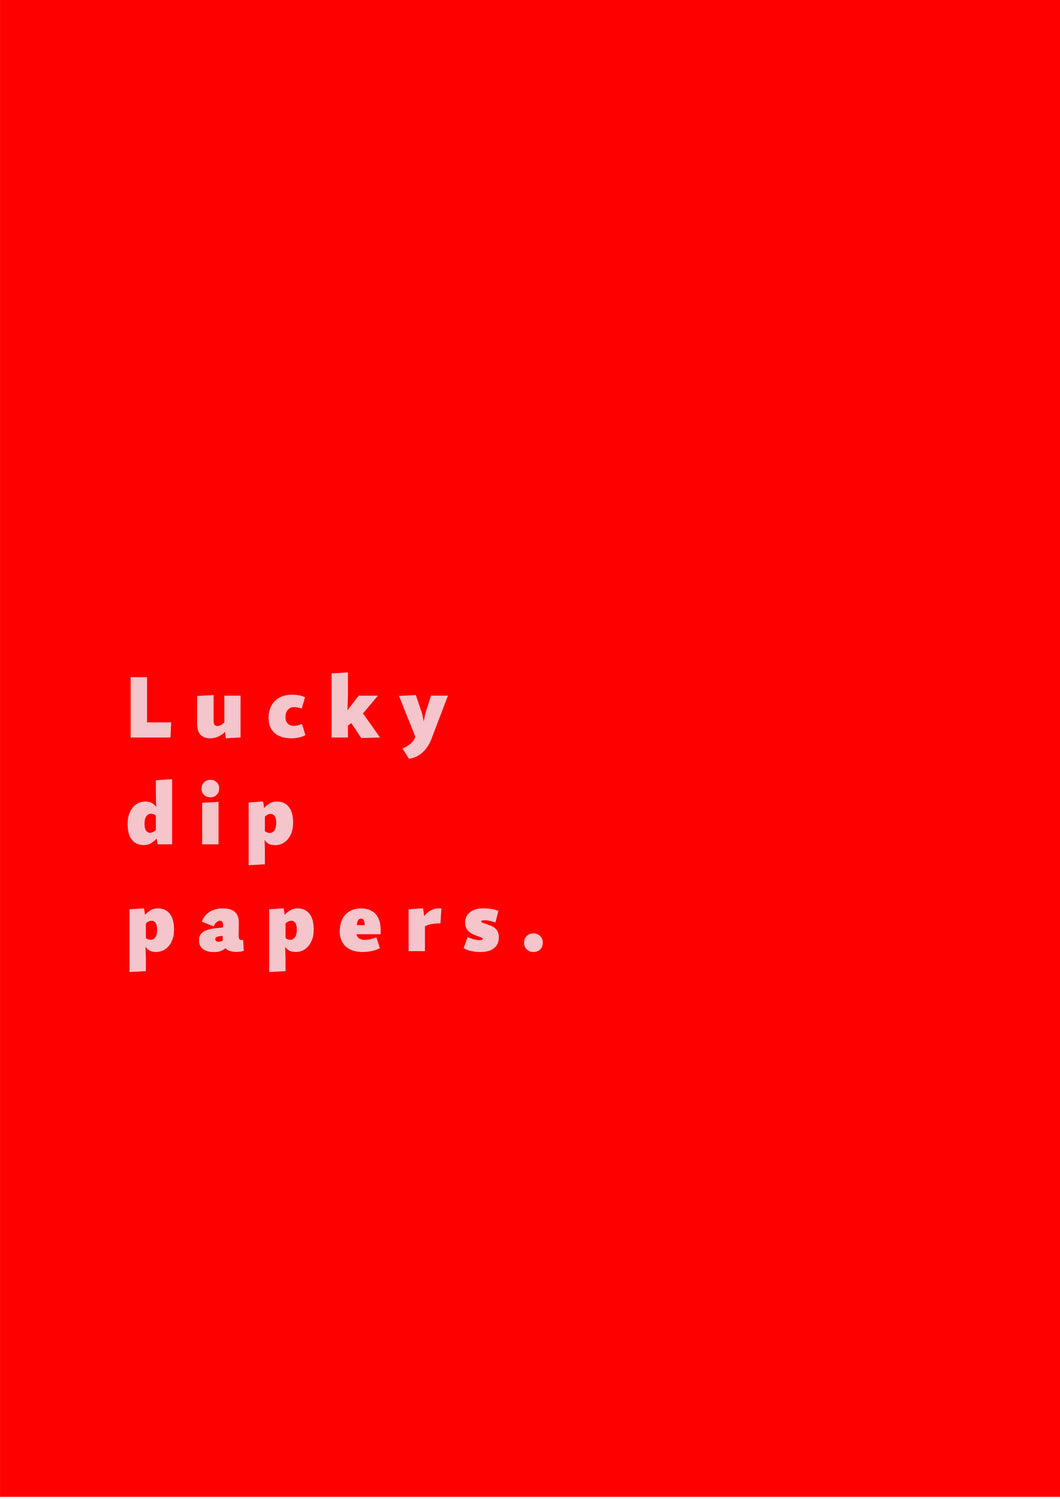 LUCKY DIP PAPERS